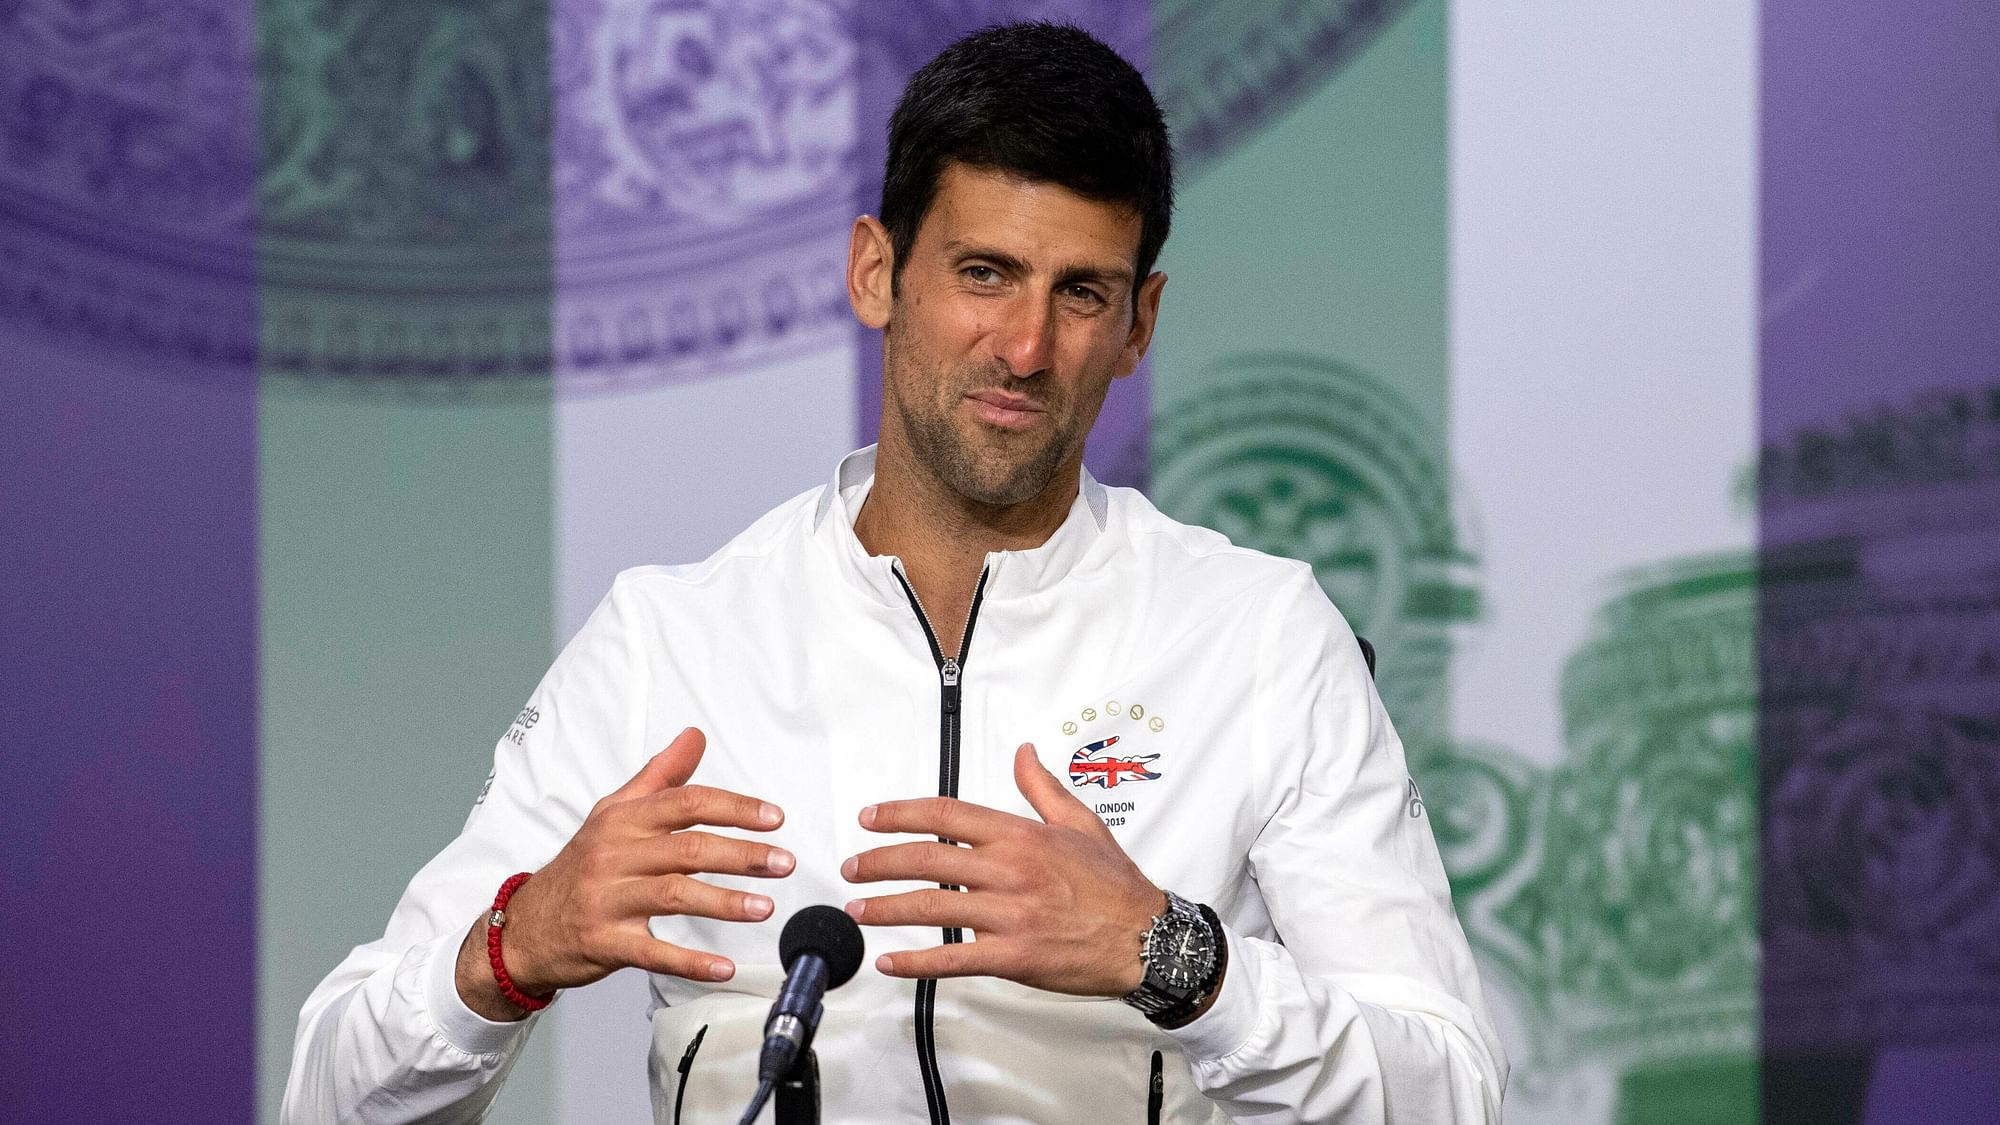 Novak Djokovic has vowed to convince fans that he is not public enemy number one.